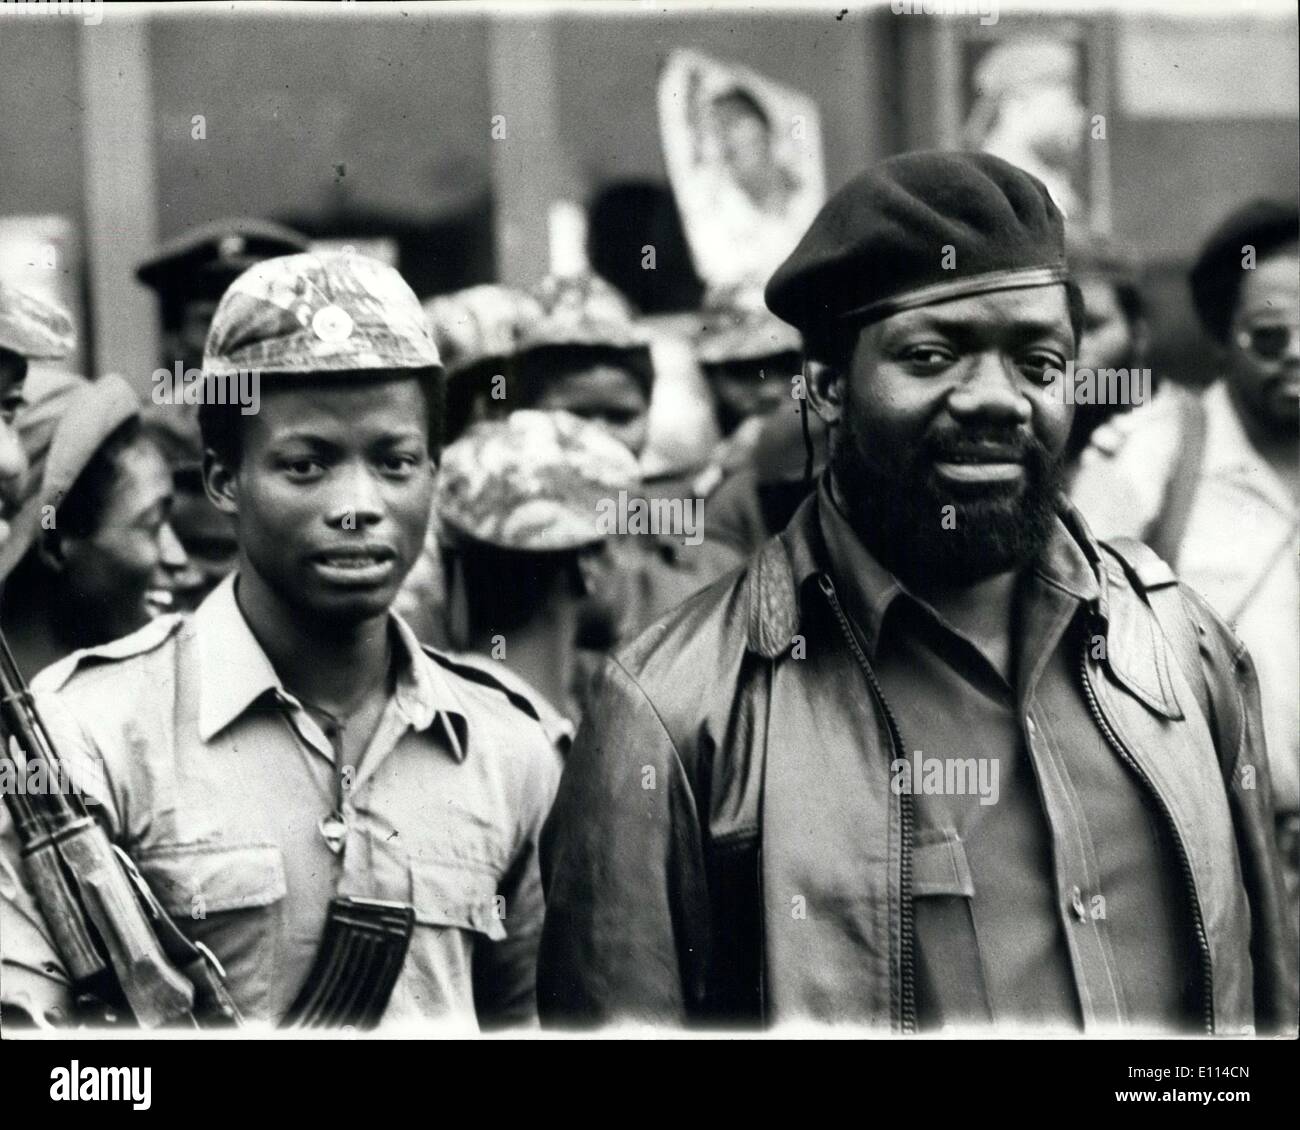 Nov. 07, 1975 - The Fighting Intensifies in Angola: The struggle for control of Angola intensifies as Independence Day, November 11th, approaches, despite reports from Kampala on Ugande radio of an agreement to form a tripartite government, In the South of the country the combined forces of UNITA and the F.N.L.A. continue to put intense military pressure on the M.P.L.A. Photo shows Dr. Jonas Savimbi,of UNITA and his Political Secretary, Ernesto Mufato, reading in intercepted M.P.L.A. message to evacuate Lobito. Stock Photo